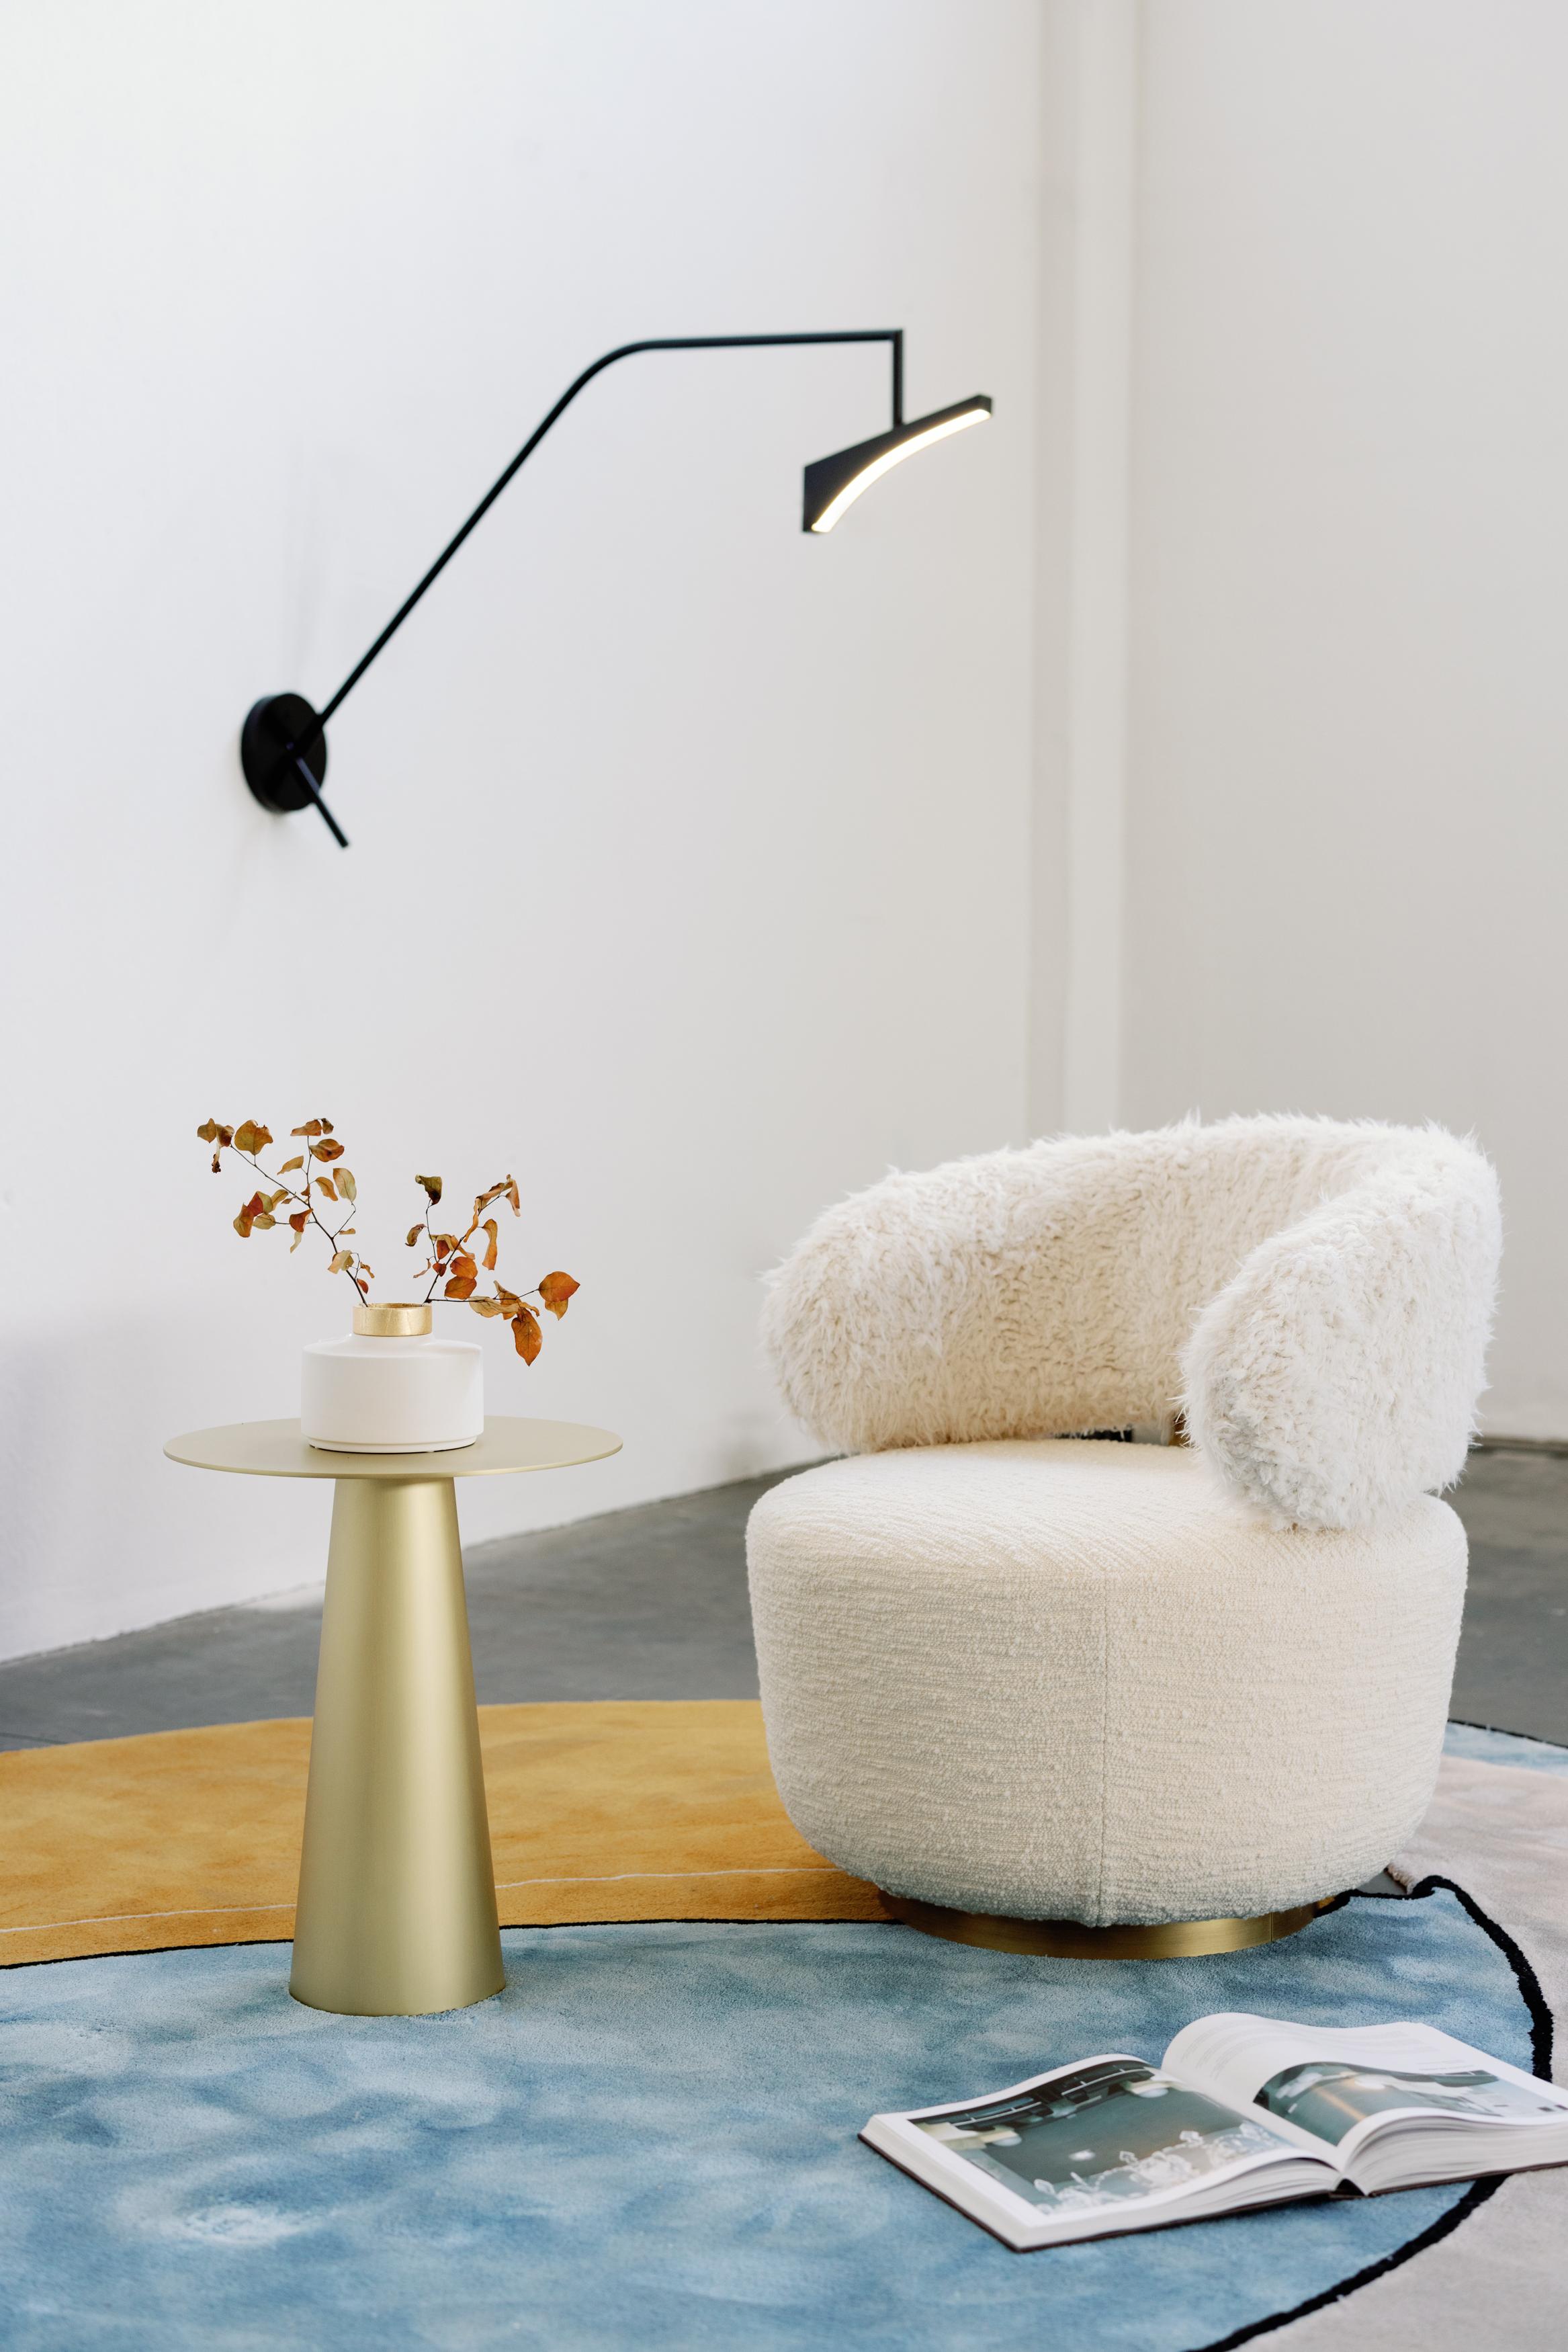 Caju Armchair, Contemporary Collection, Handcrafted in Portugal - Europe by Greenapple.

The light colour palette combined with the soft bouclé fabric and white faux fur of our Caju armchair adds warmth and a sophisticated vintage feel to any living